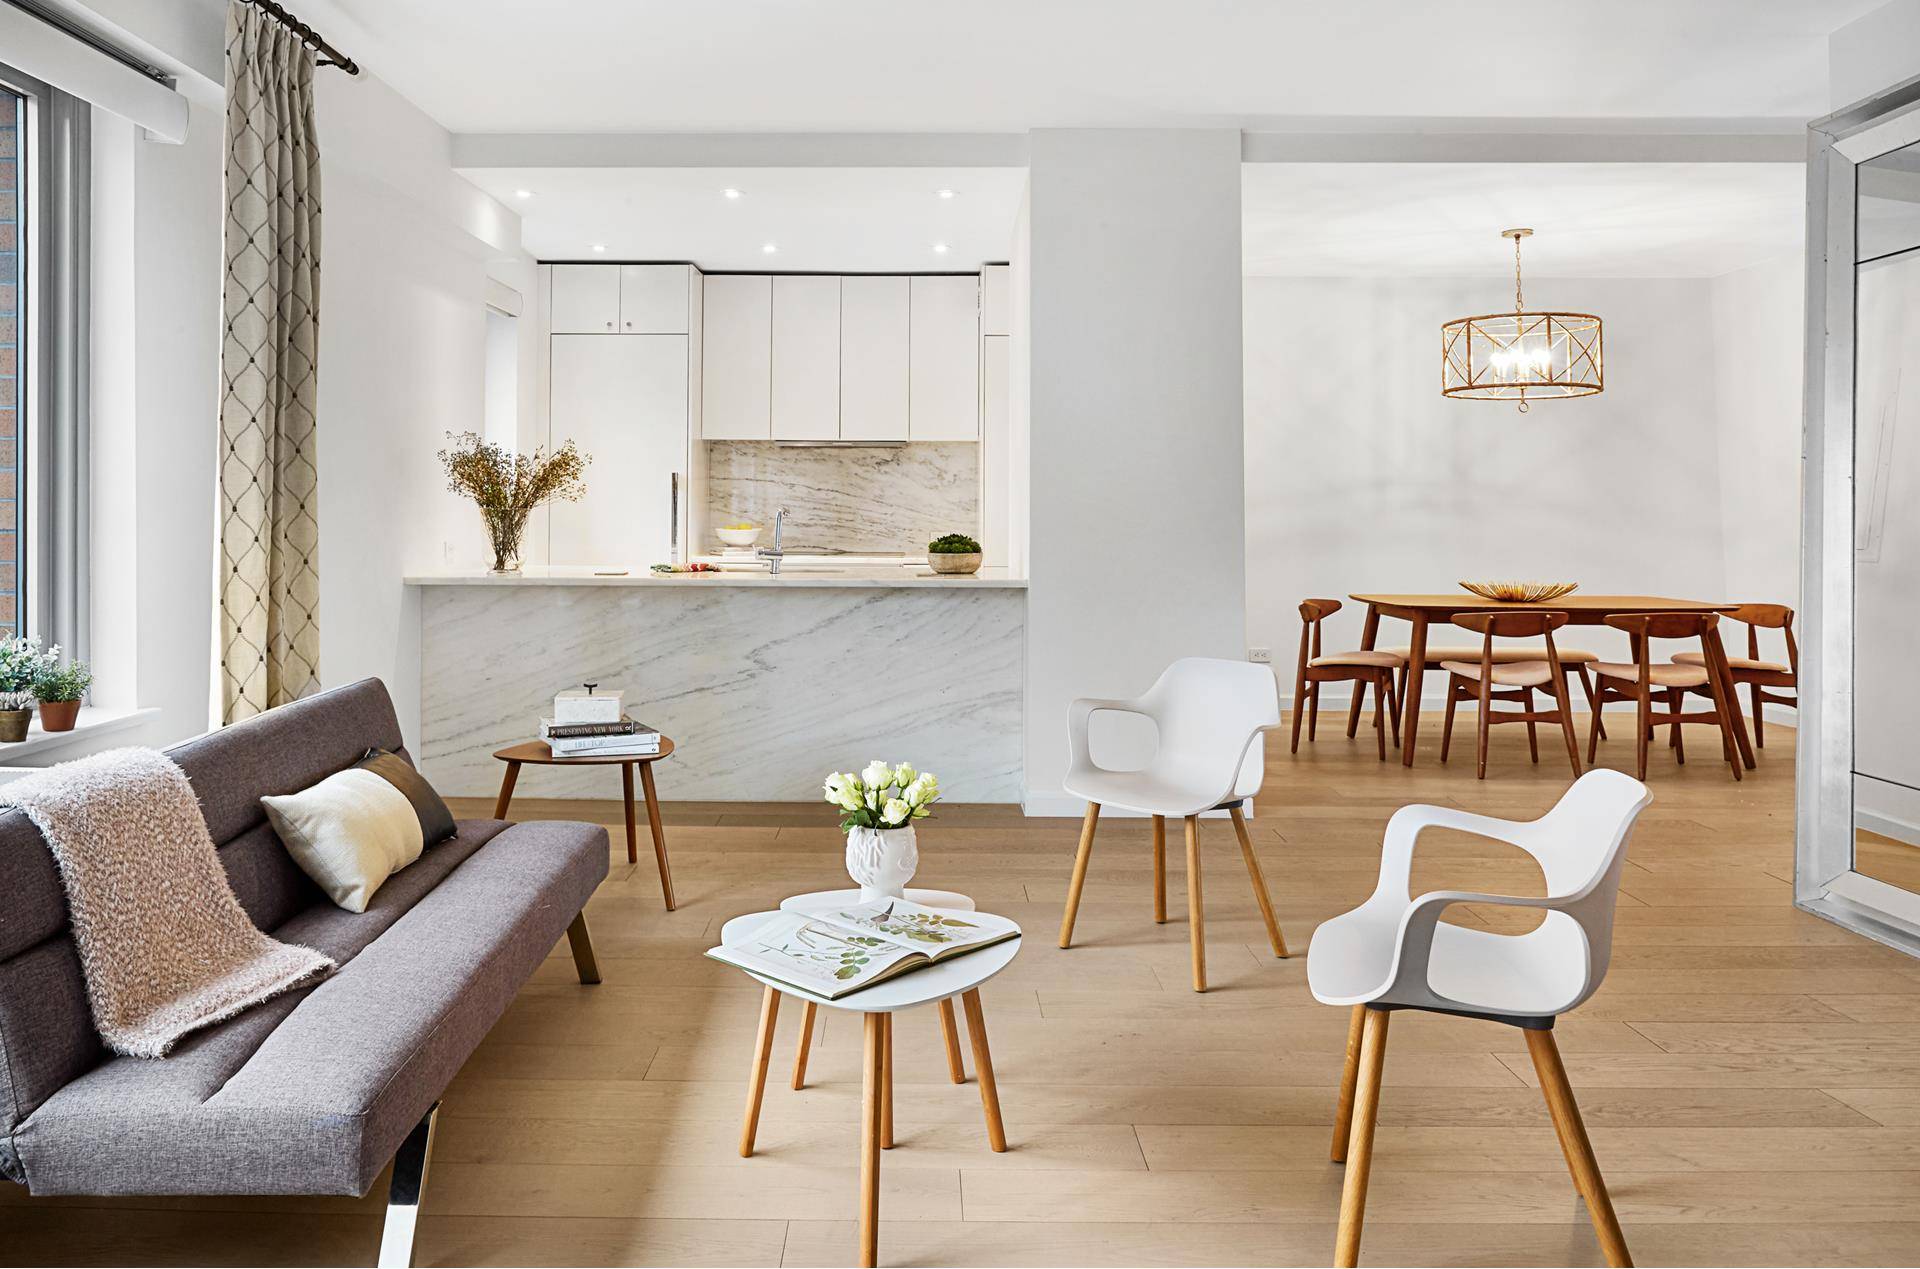 Welcome home to this tasteful and stylish 1, 145sf one bedroom, 1.